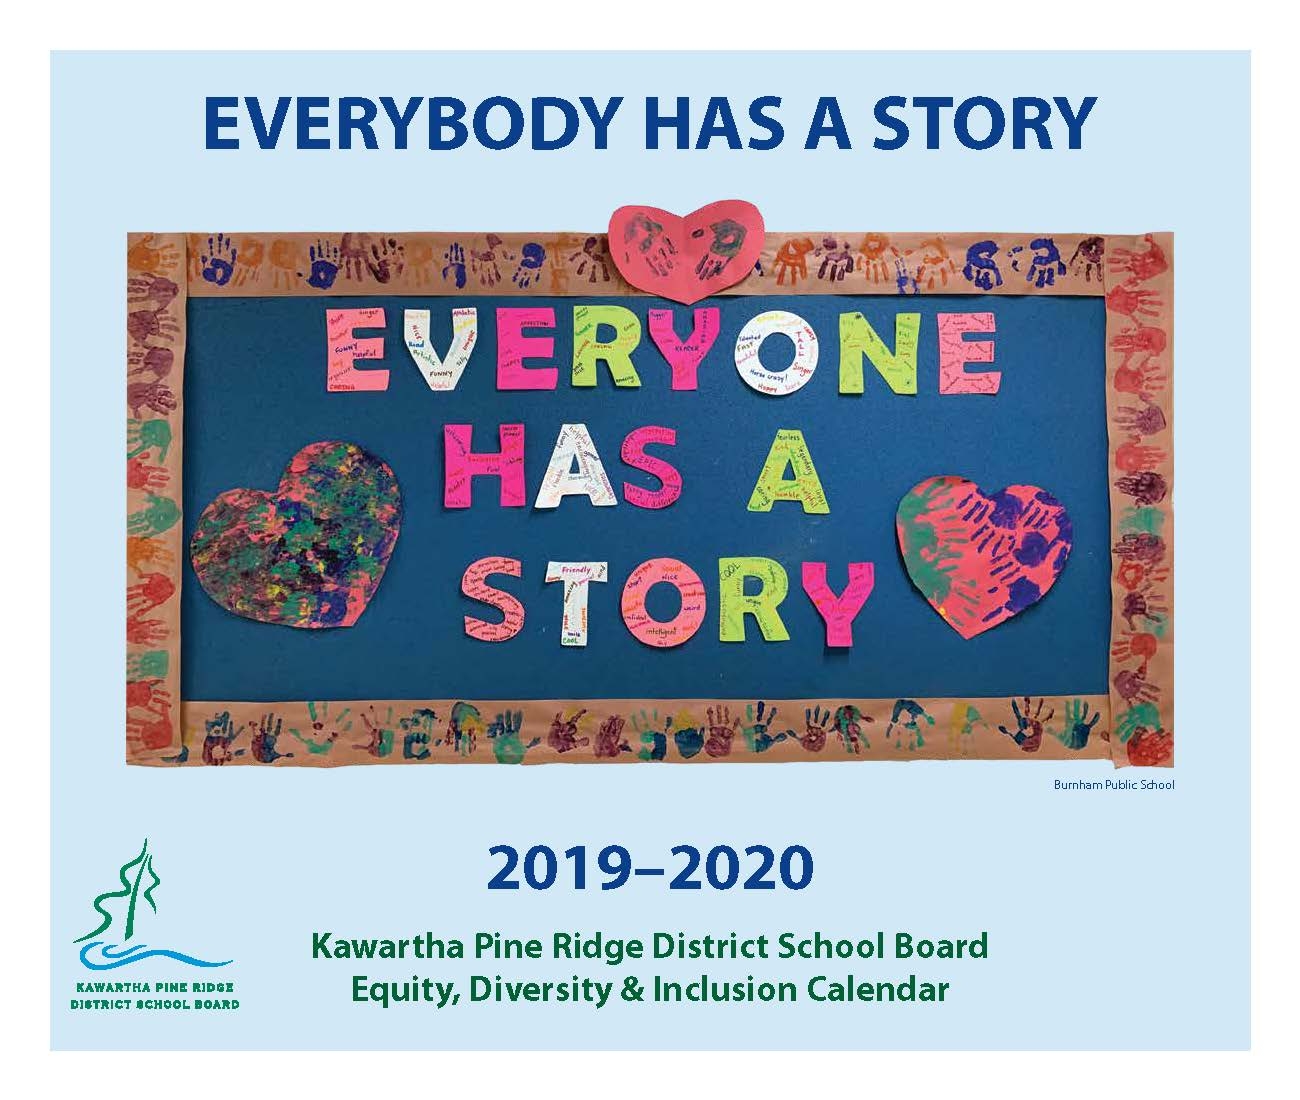 Equity, Diversity And Inclusion Calendar Calendar Of Religious Events For Canadian Jews In 2020